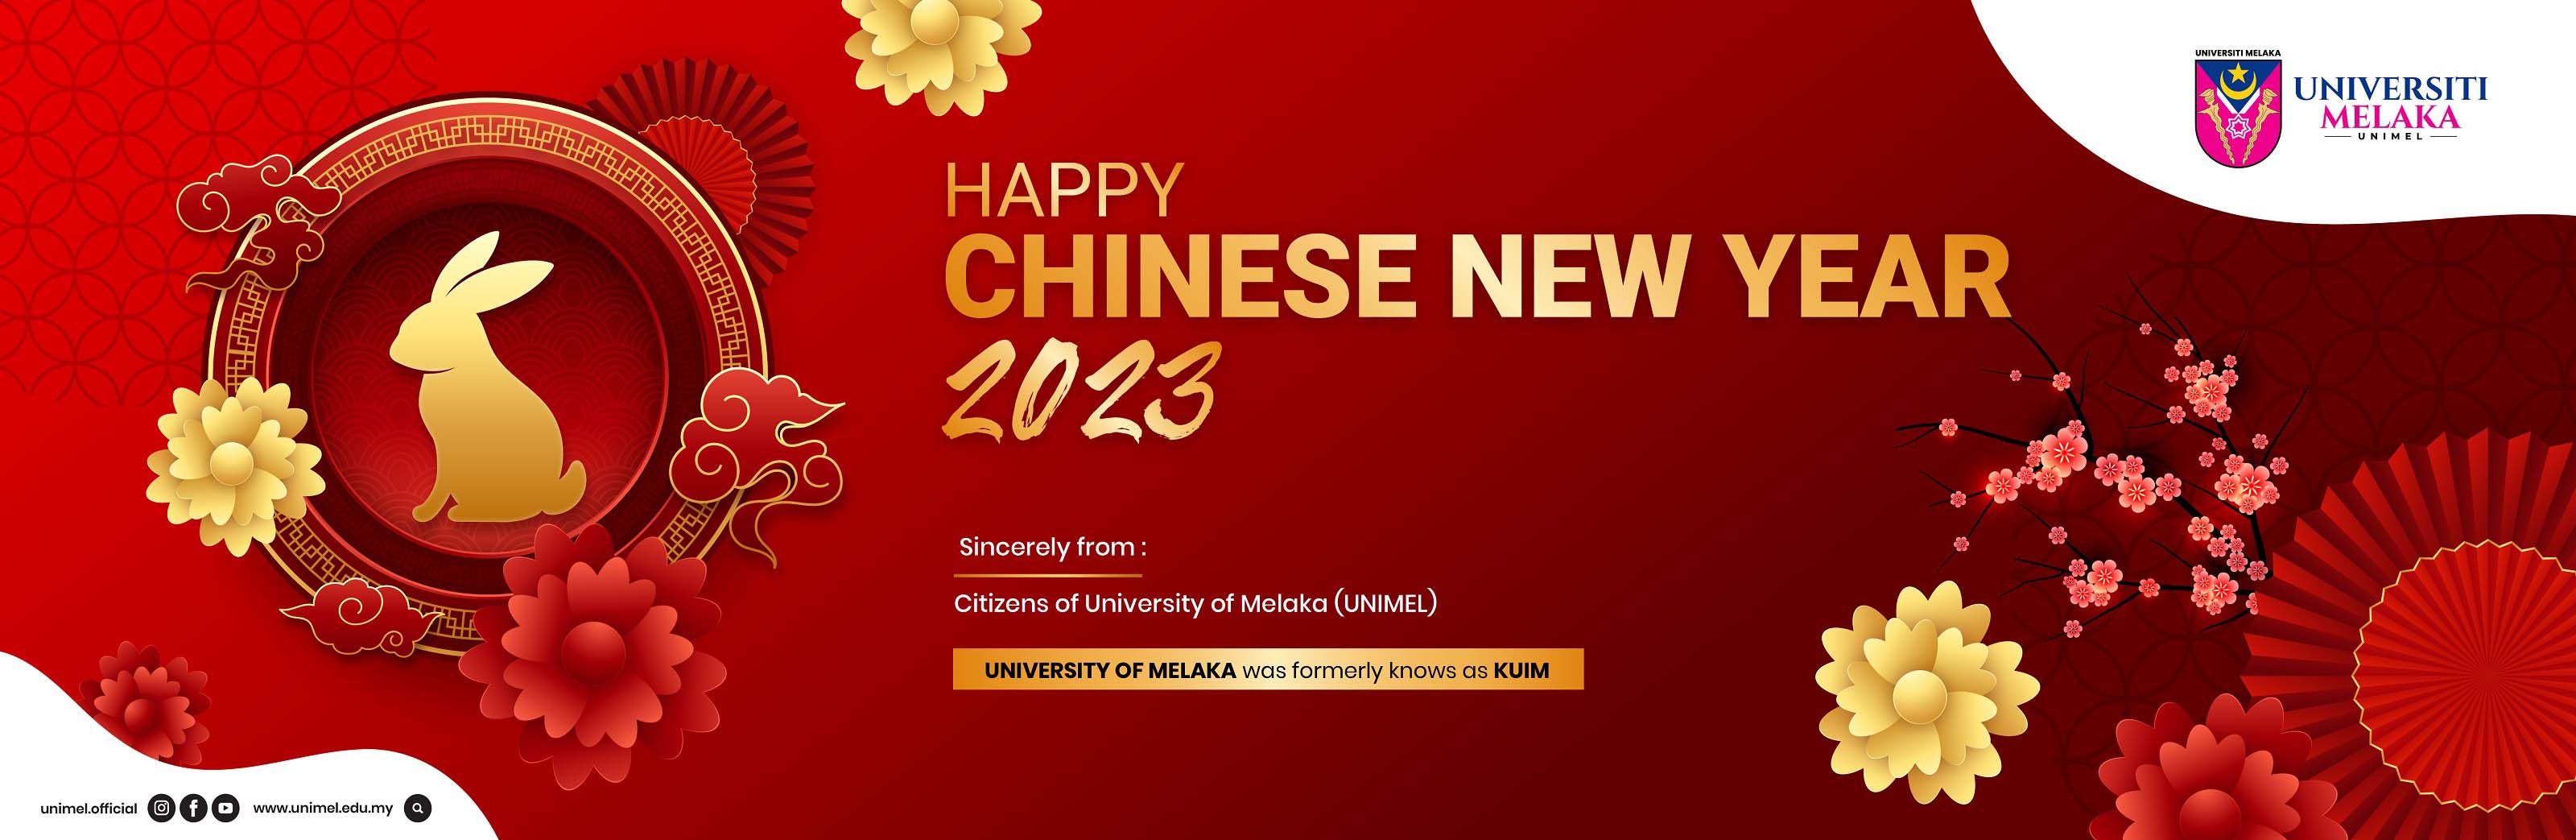 CHINESE_NEW_YEAR_EN